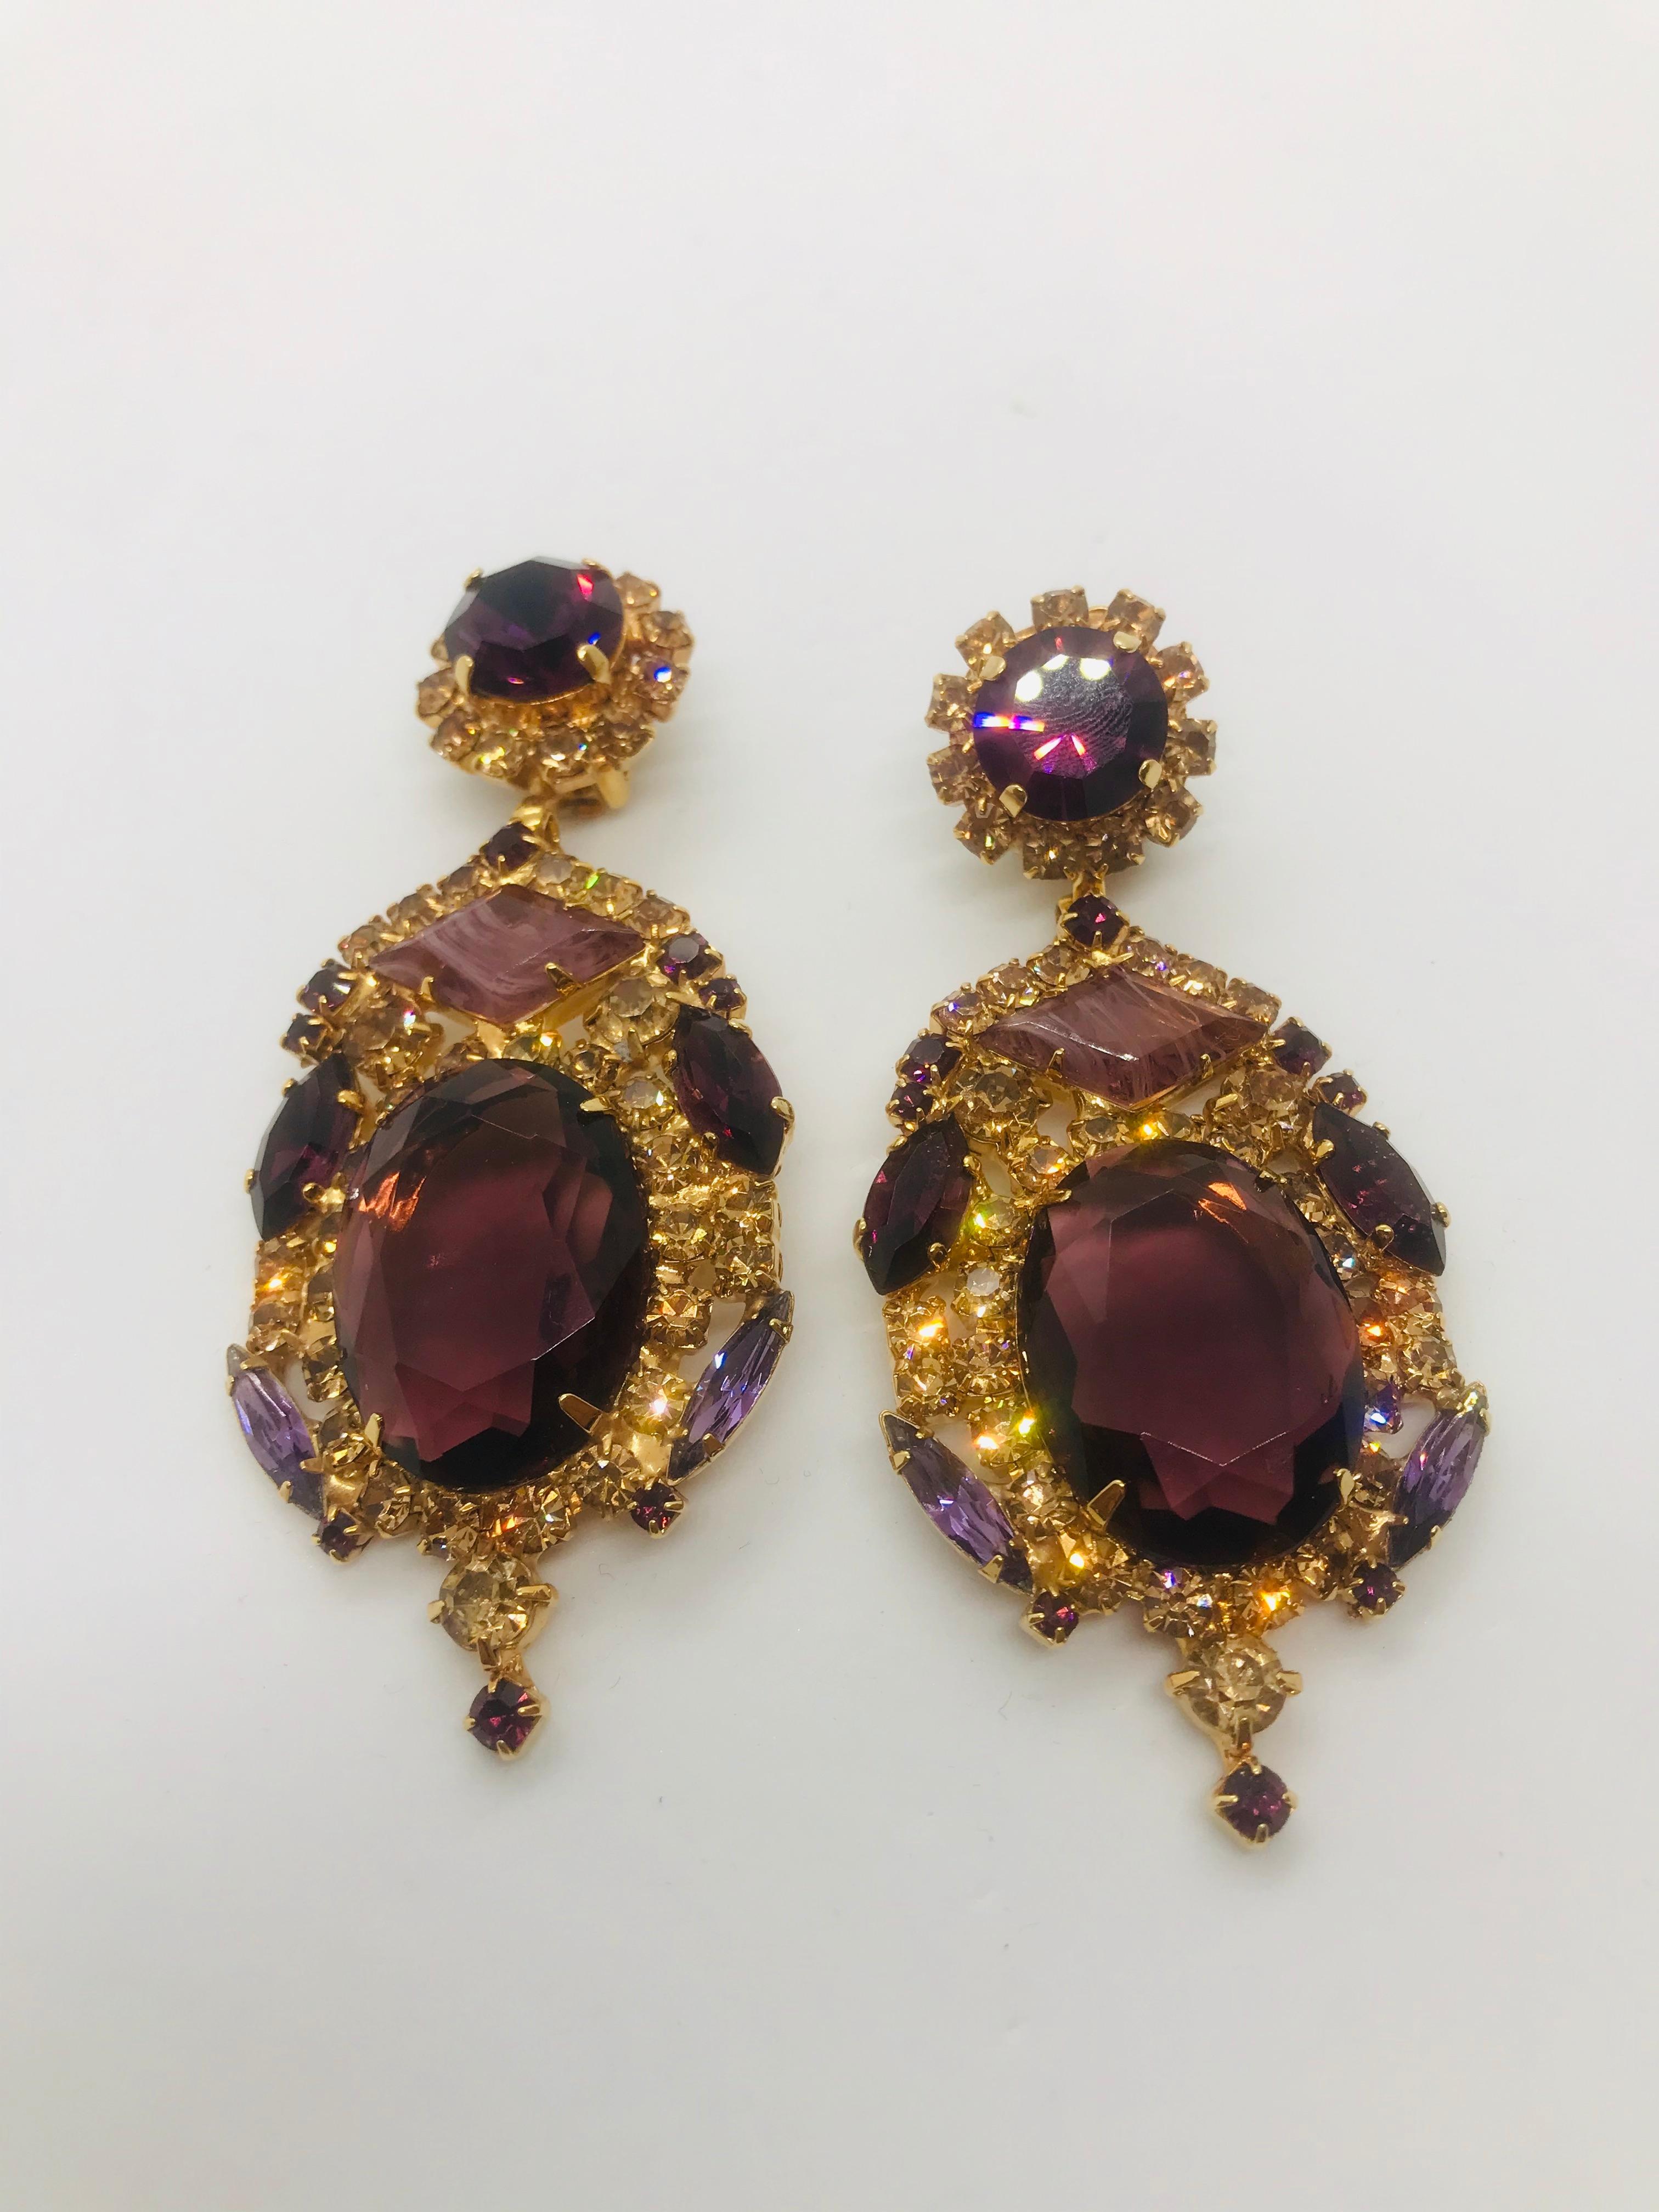 These large and dramatic smoked topaz and amethyst Austrian crystal pendant drop earrings have a 